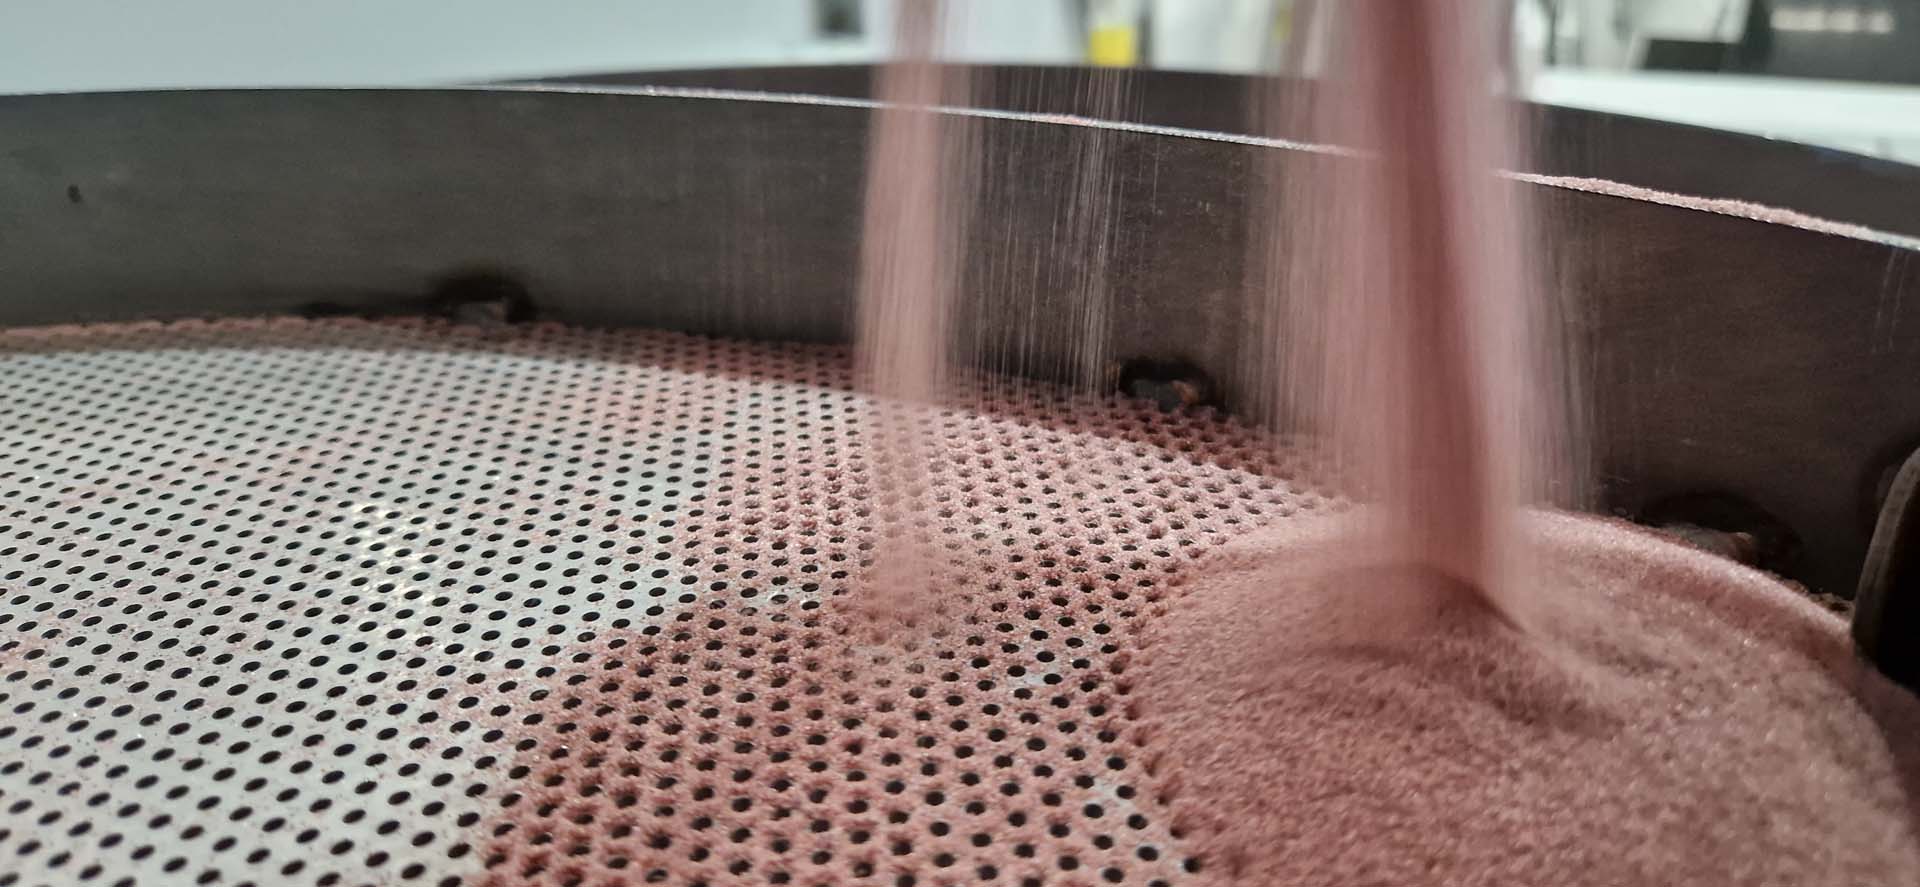 Garnet sand poured into the feed hopper of the Intermac Waterjet